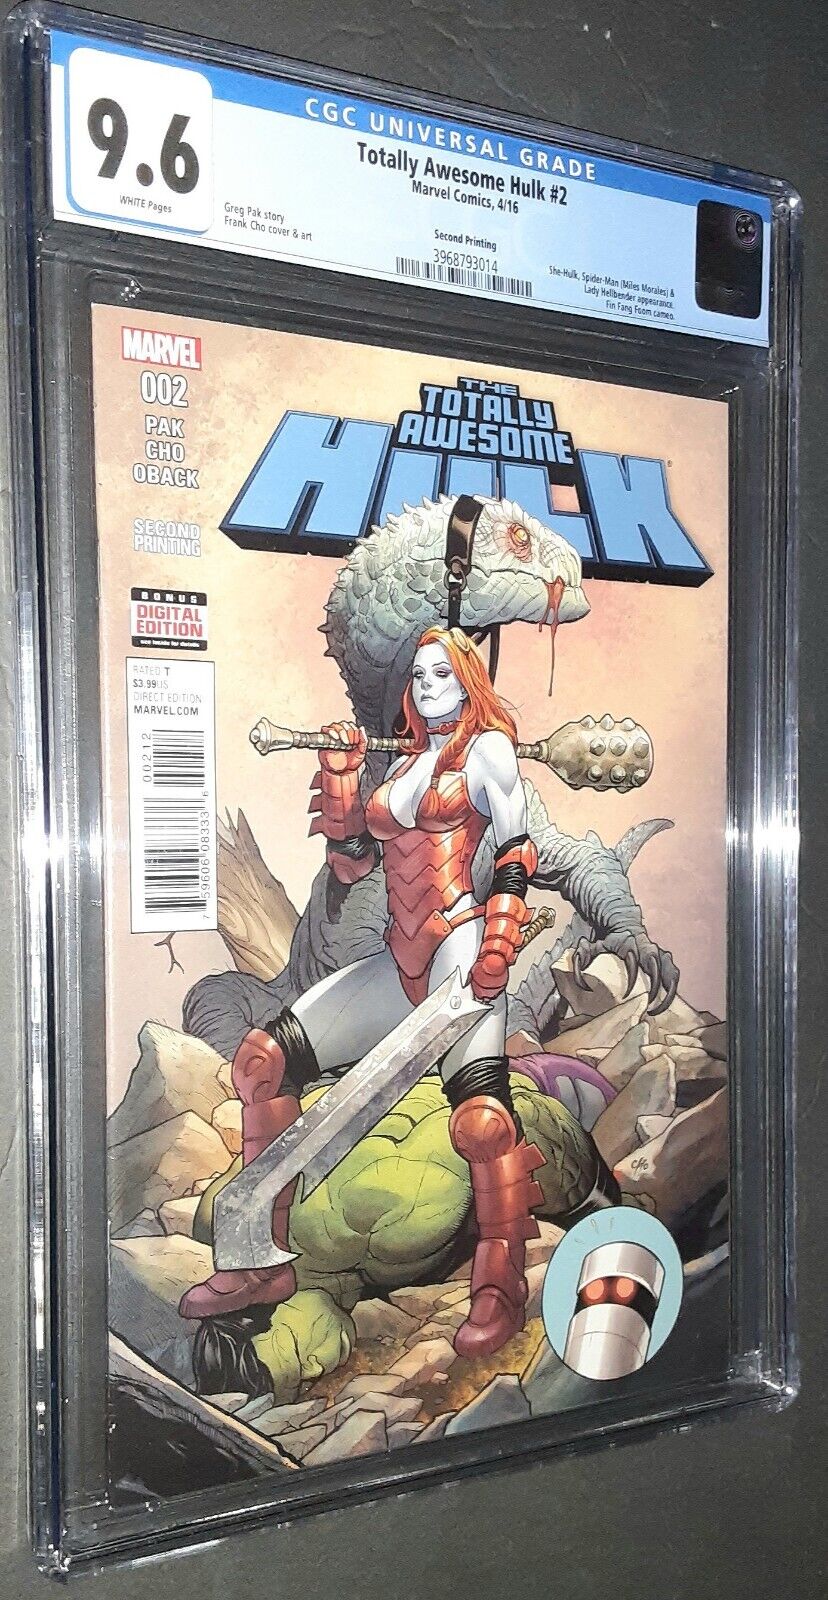 Totally Awesome Hulk #2 CGC 9.6 [1ST COVER APP LADY HELLBENDER] Marvel 2nd Print